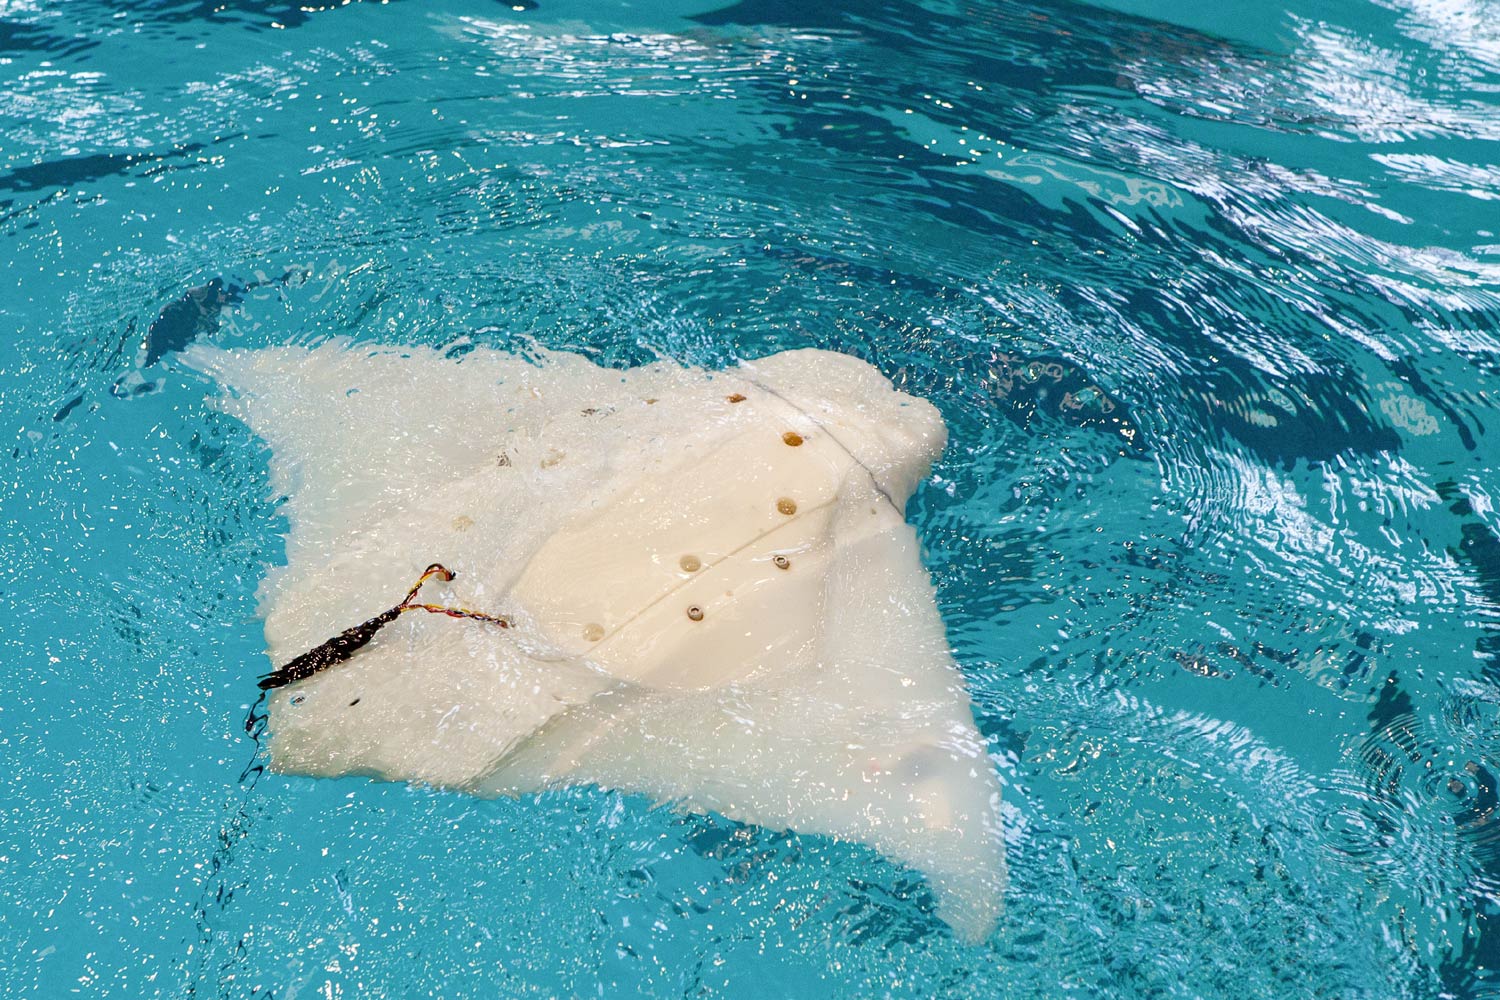 A Mantabot sample swims in the Aquatic and Fitness Center